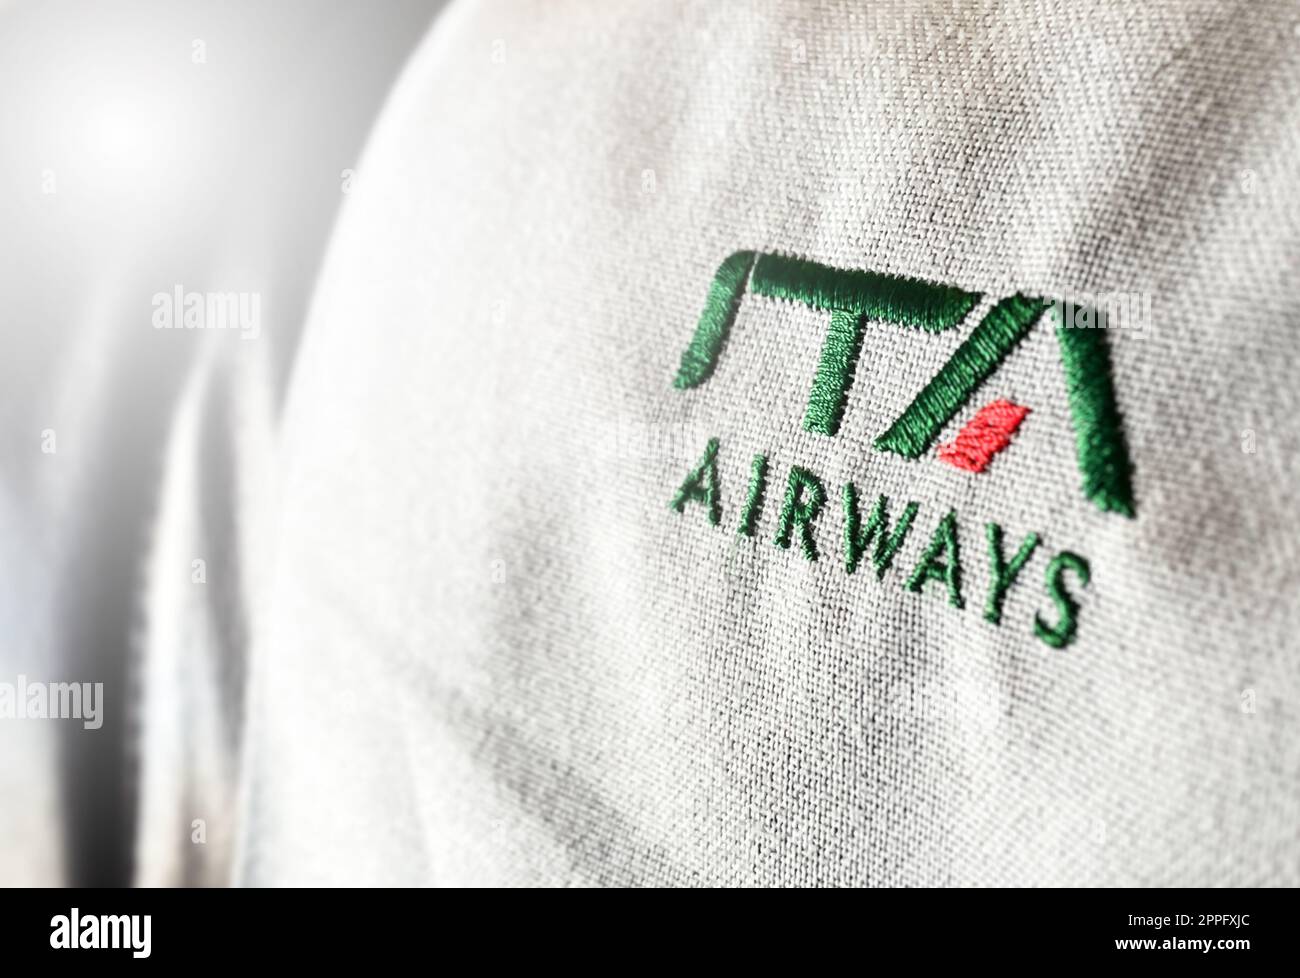 The logo of the airline ITA Airways sewn on the headrest of an aircraft Stock Photo